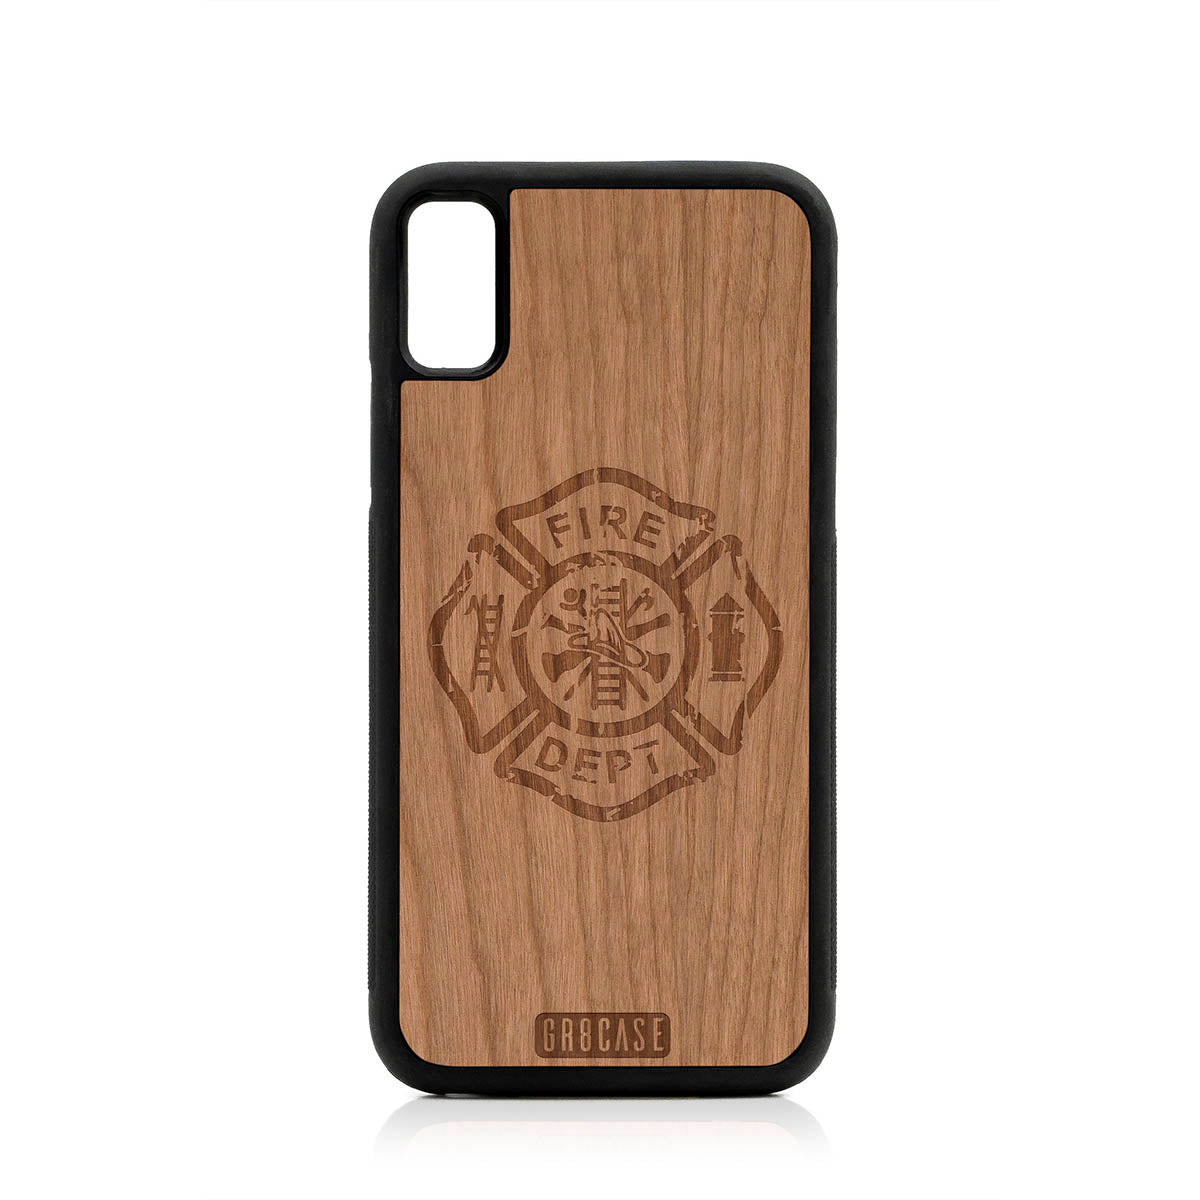 Fire Department Design Wood Case For iPhone XR by GR8CASE